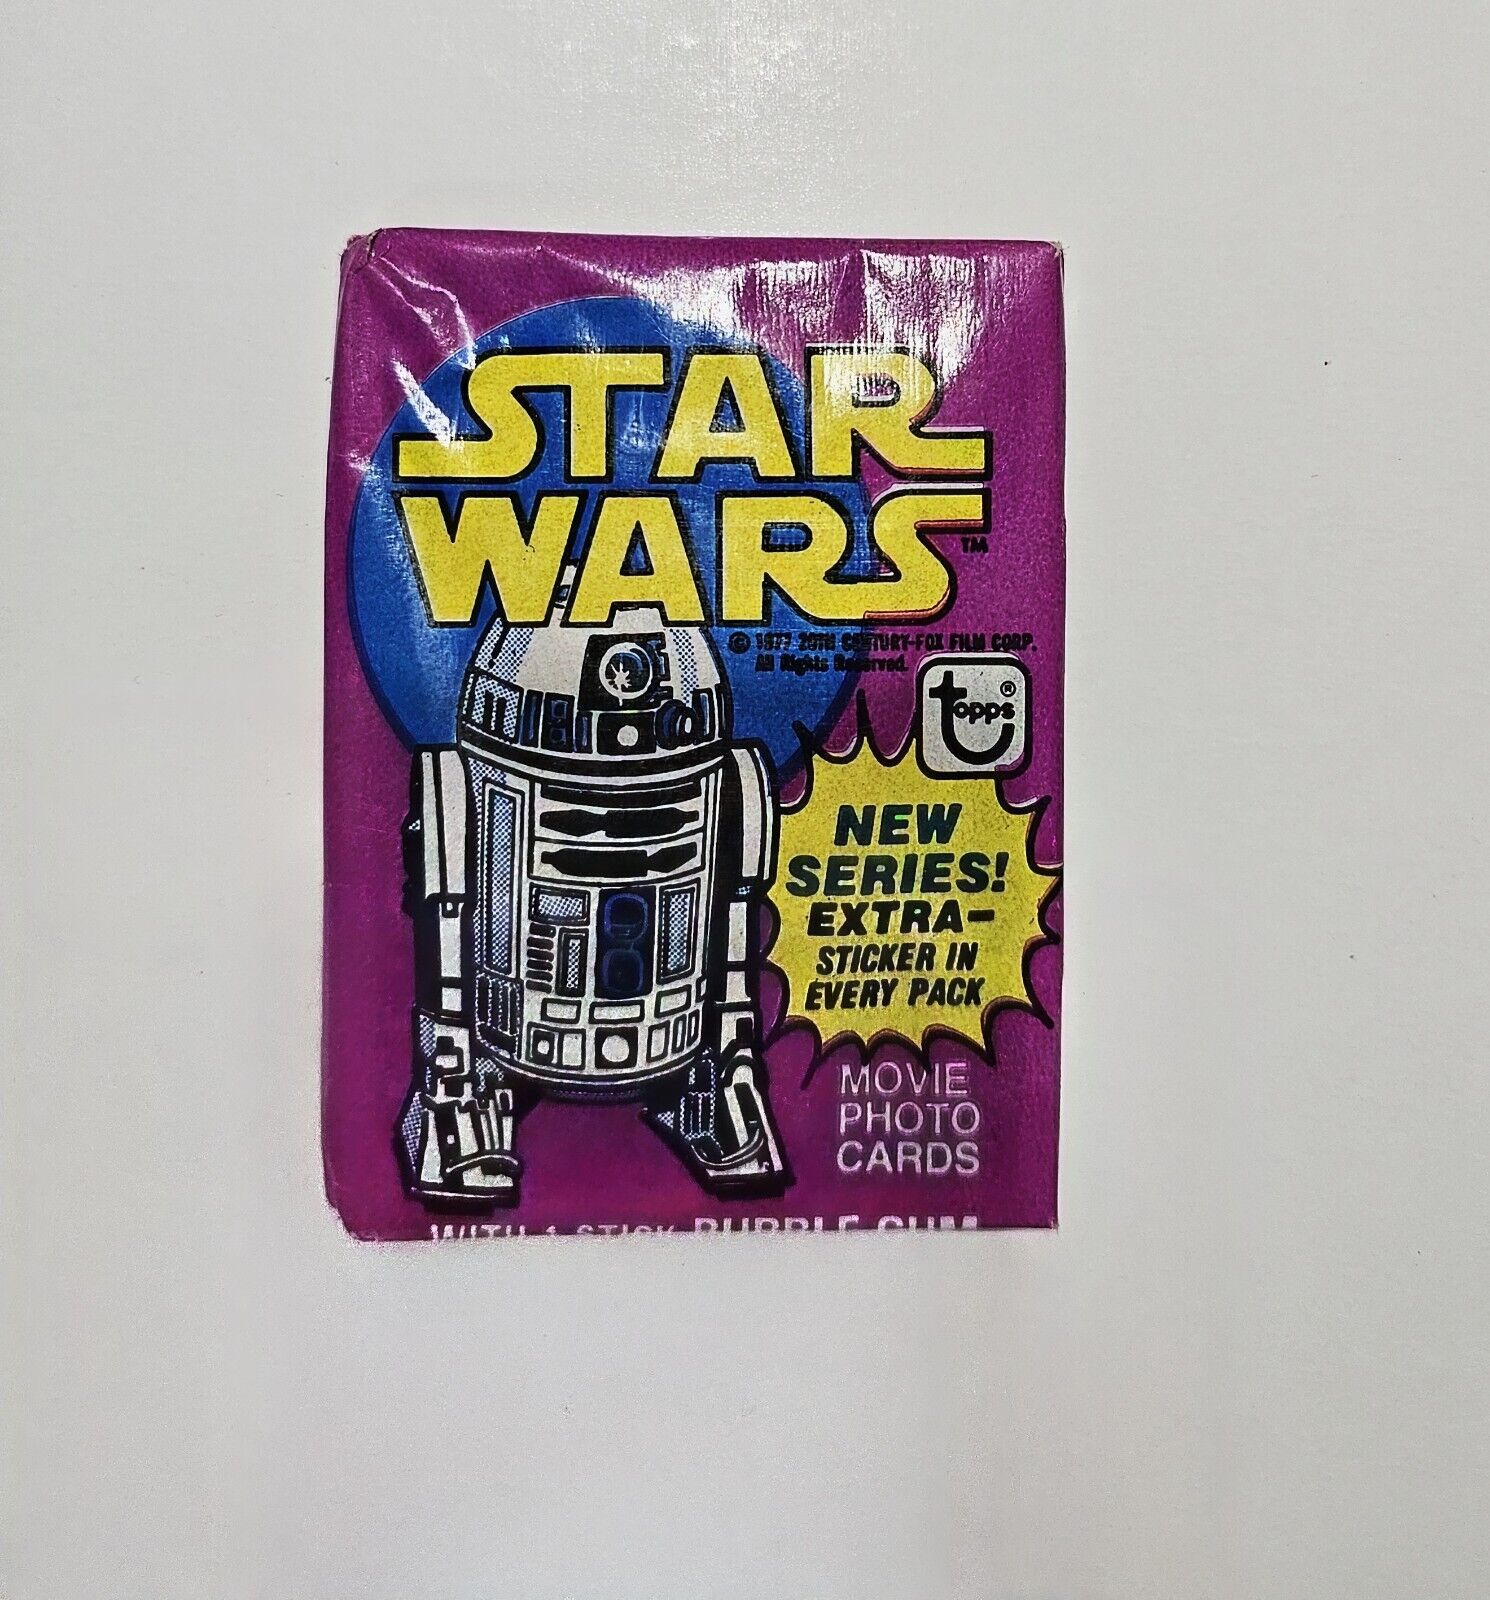 Star Wars Vintage 1977 Series 3 Sealed Wax Pack topps cards & sticker